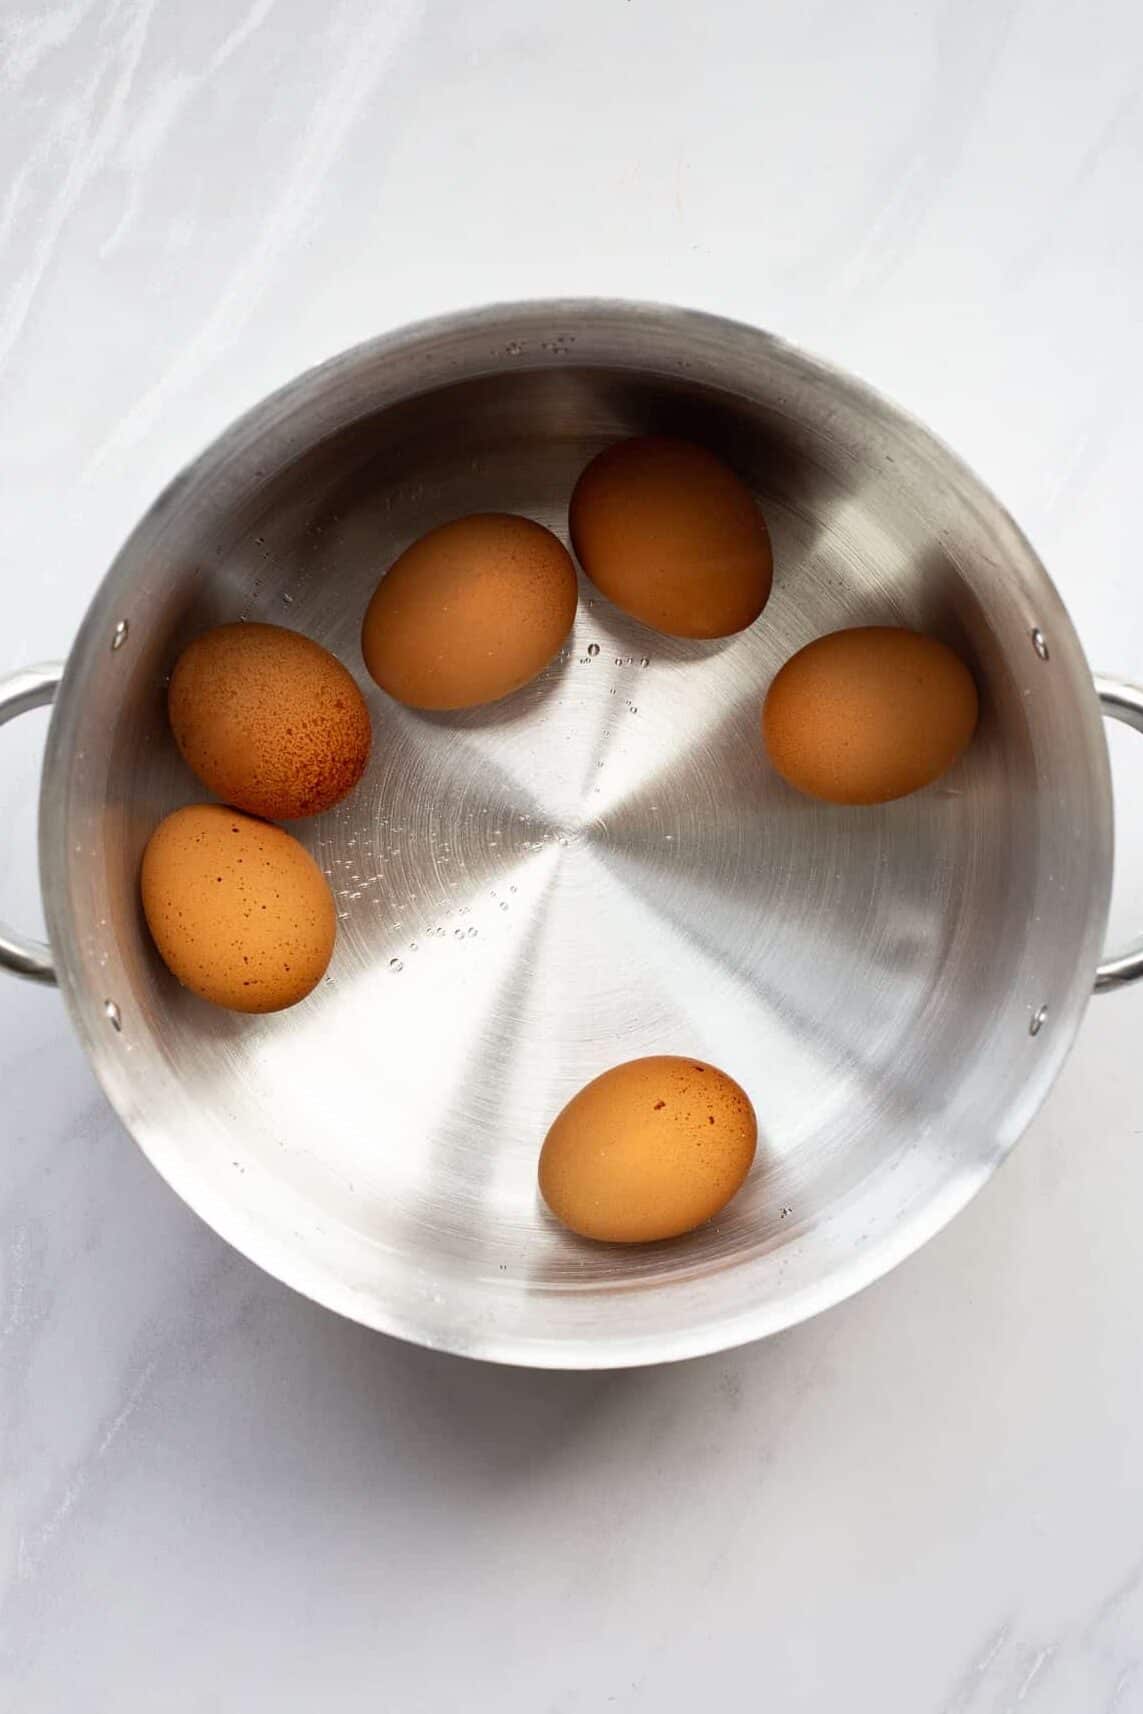 stainless steel saucepan with 6 brown hard boiled eggs submerged in water